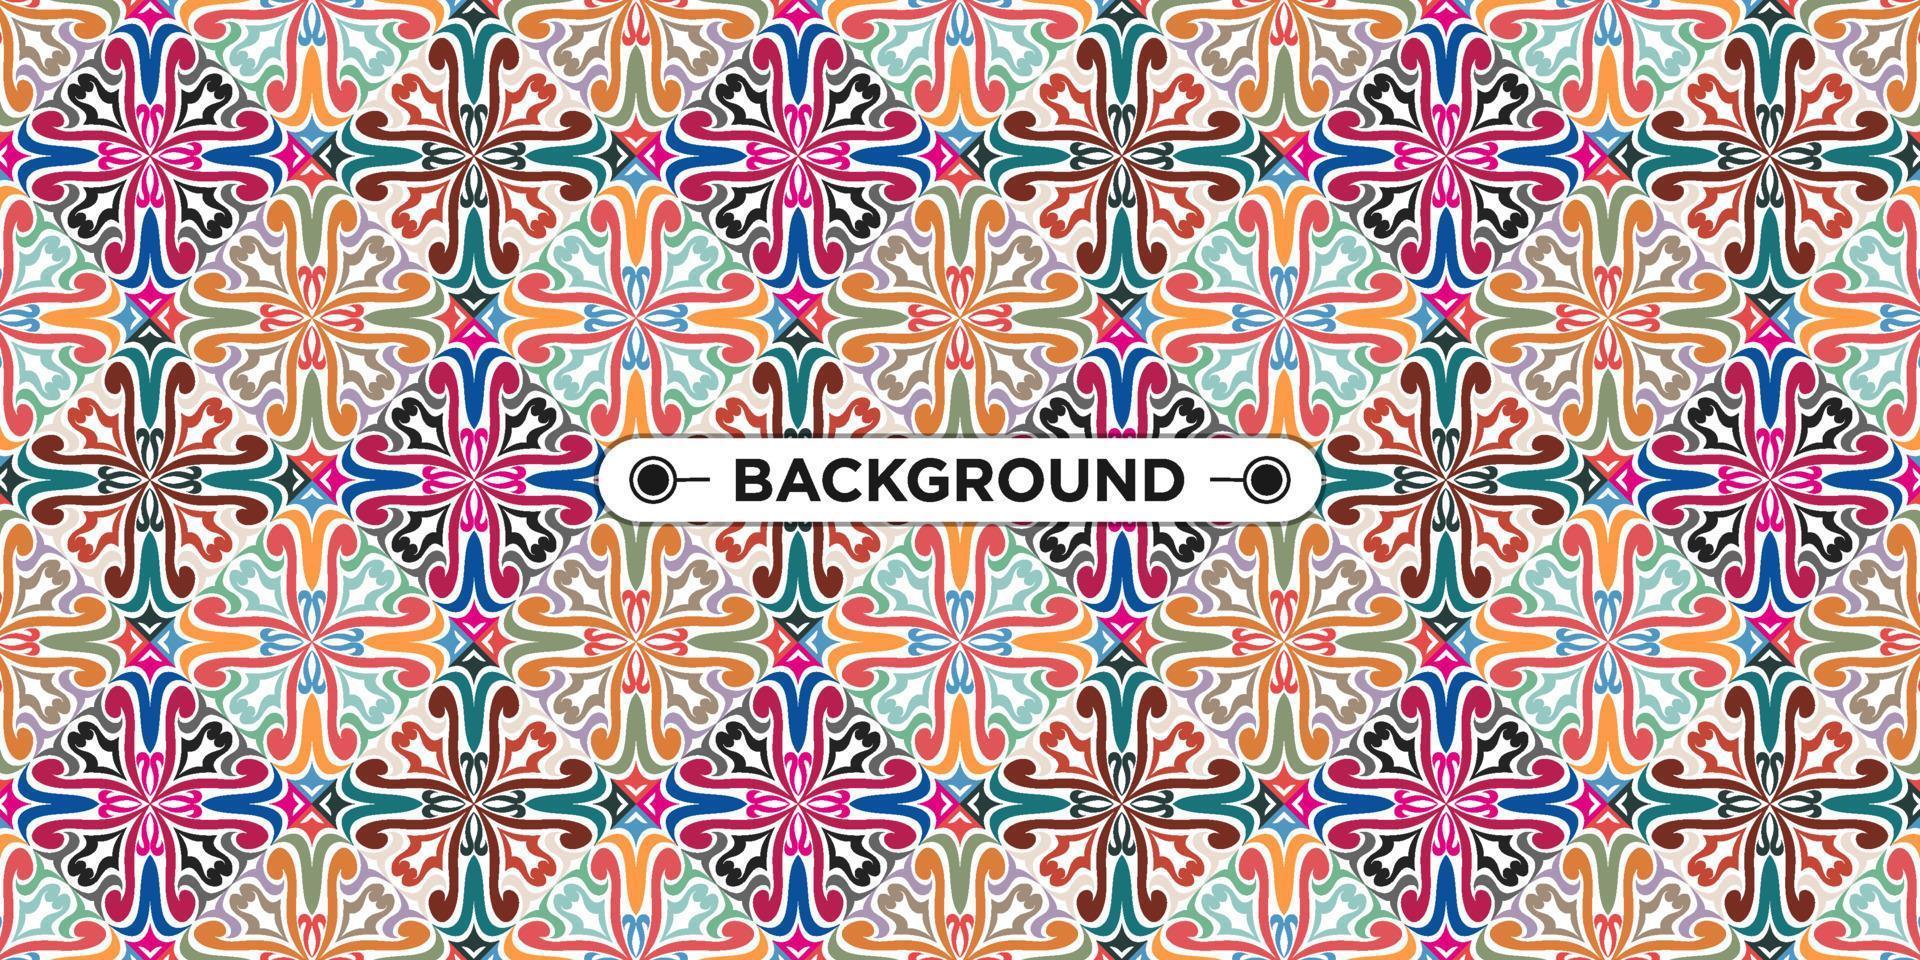 colorful background with ethnic texture vector